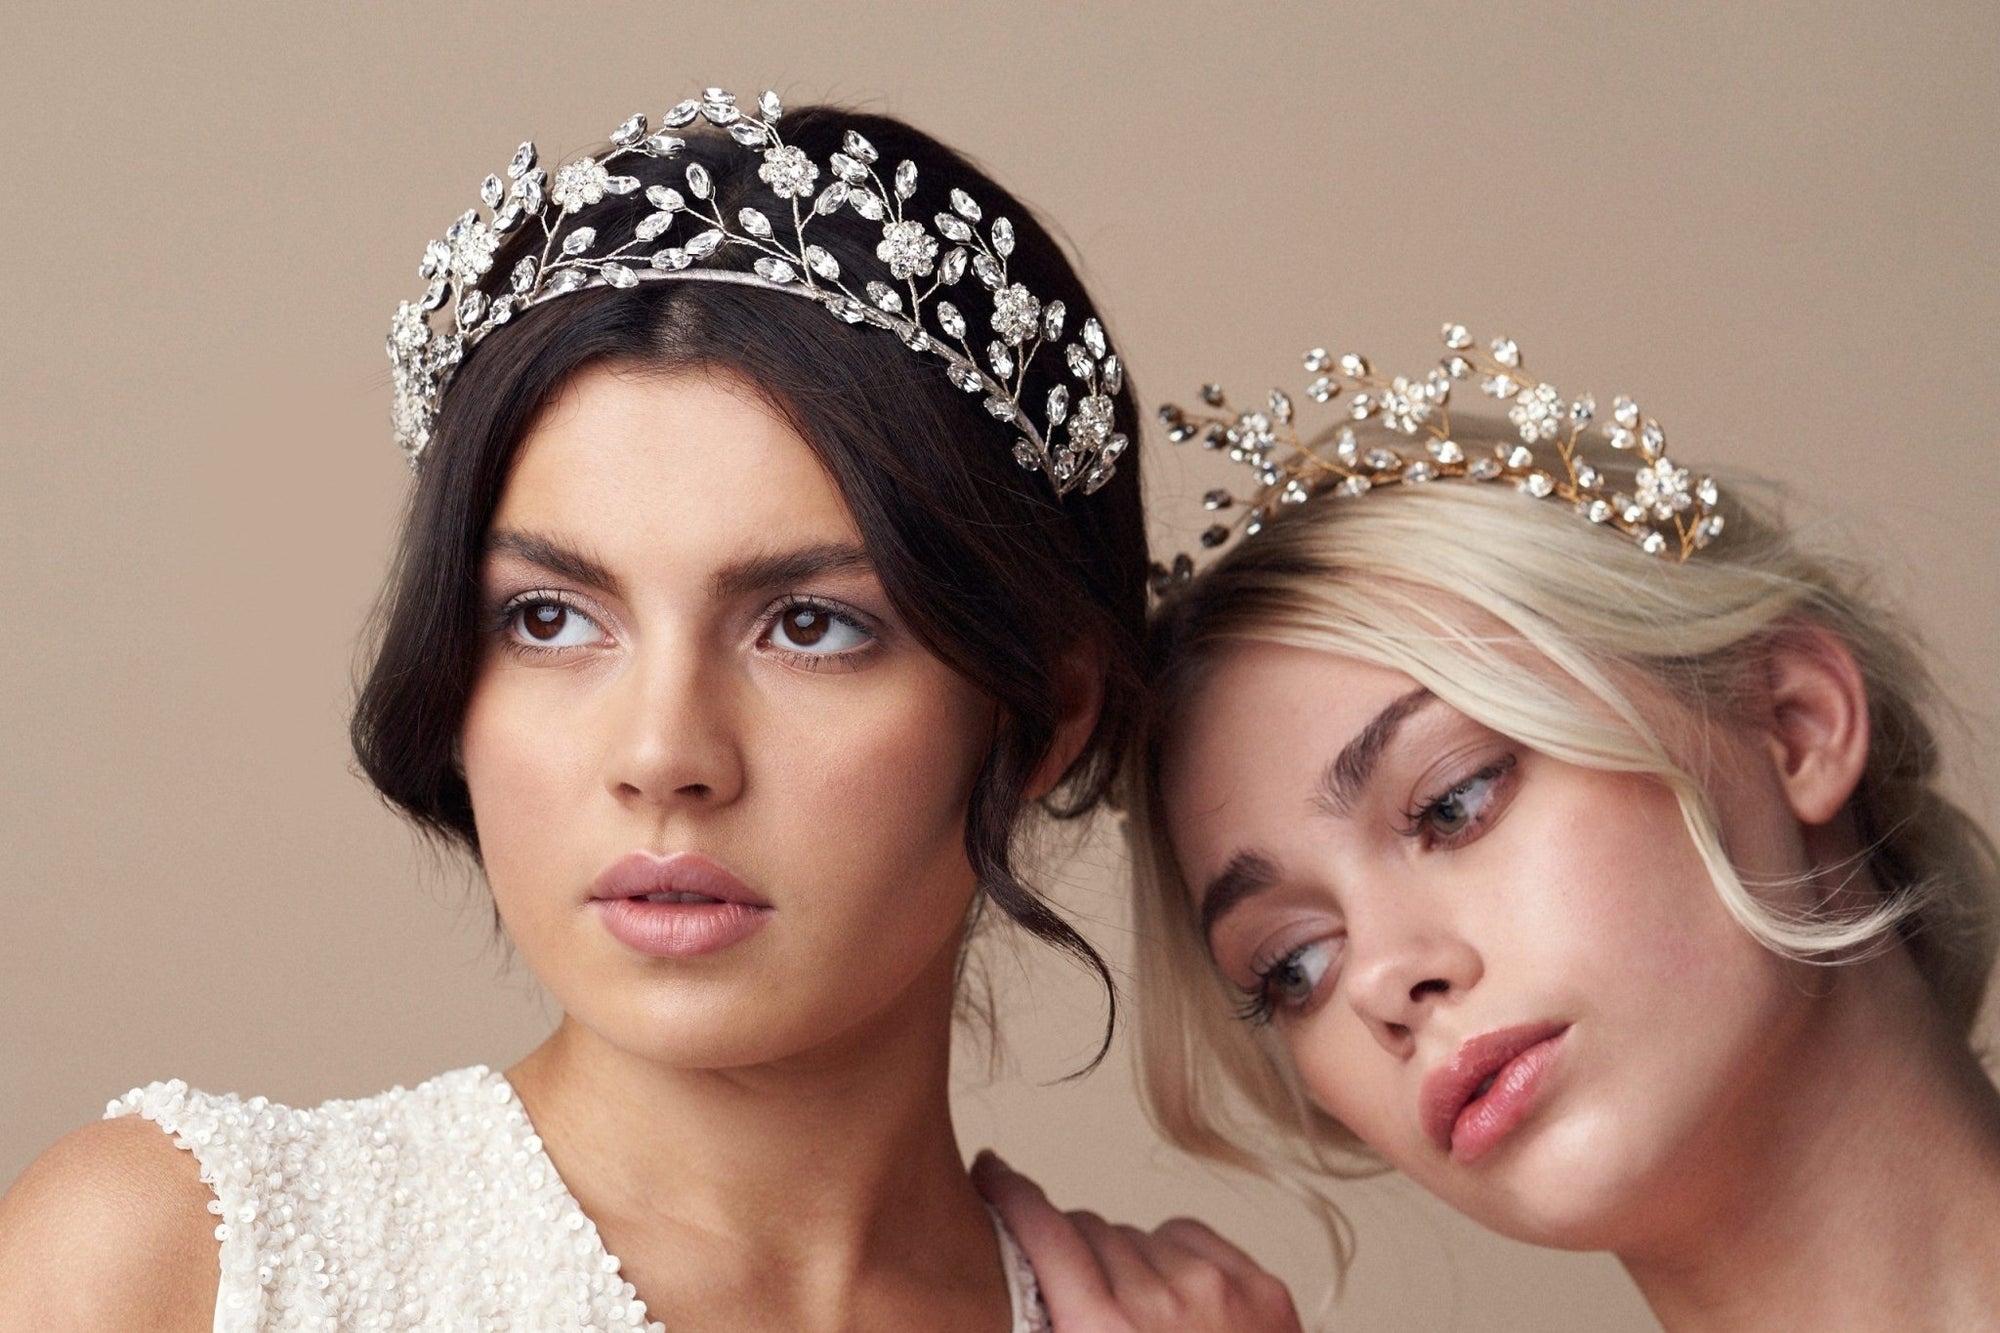 How to choose a wedding crown to suit your bridal style